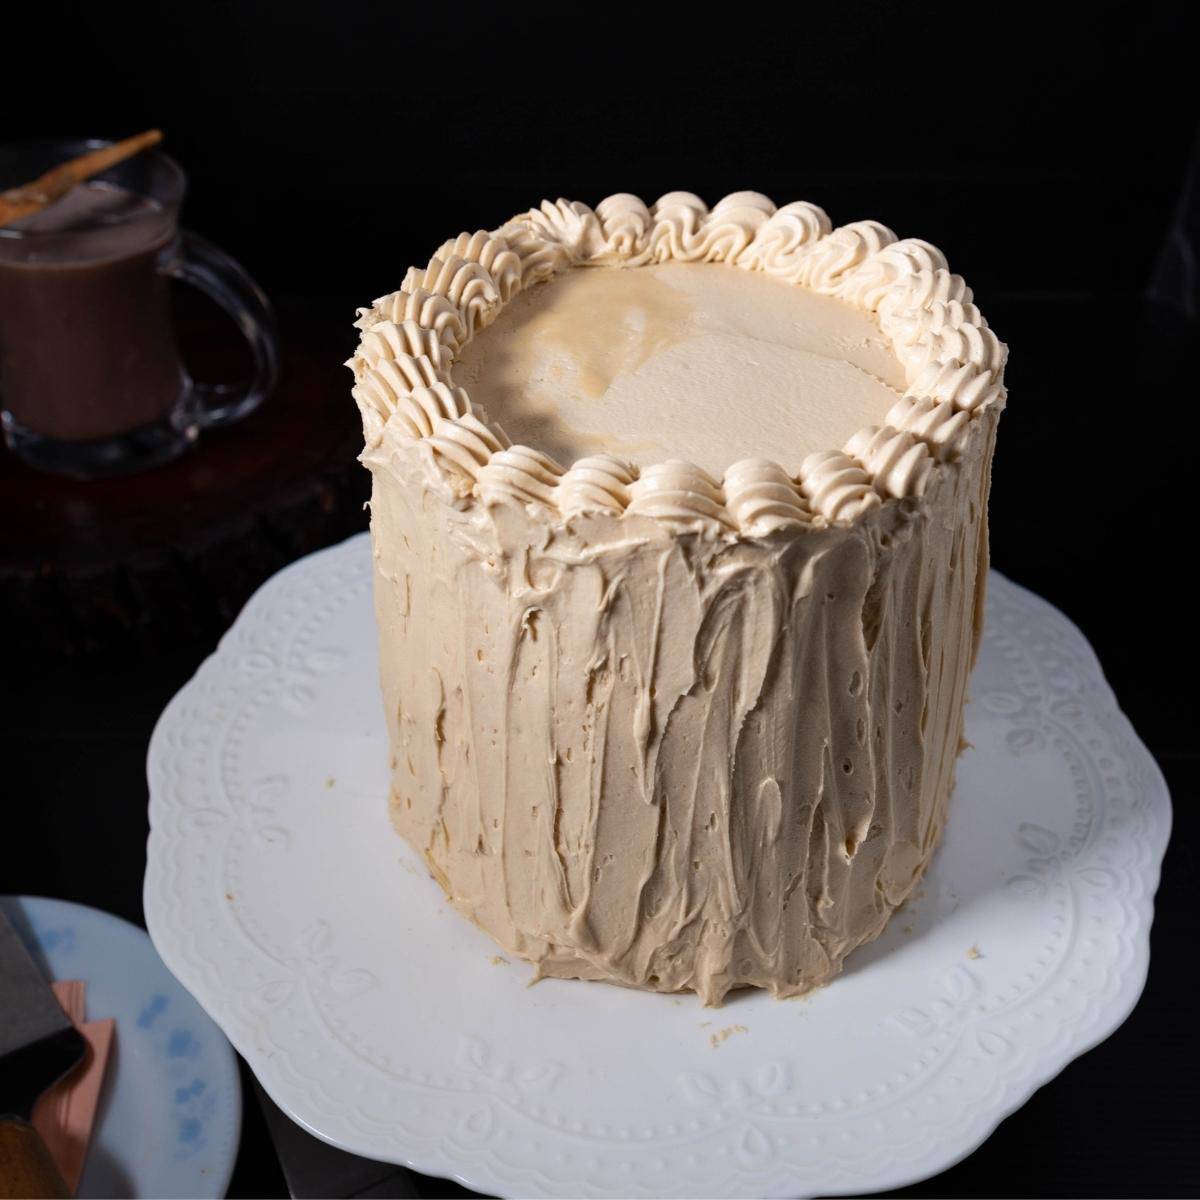 A cake with buttercream frosting on a stand.